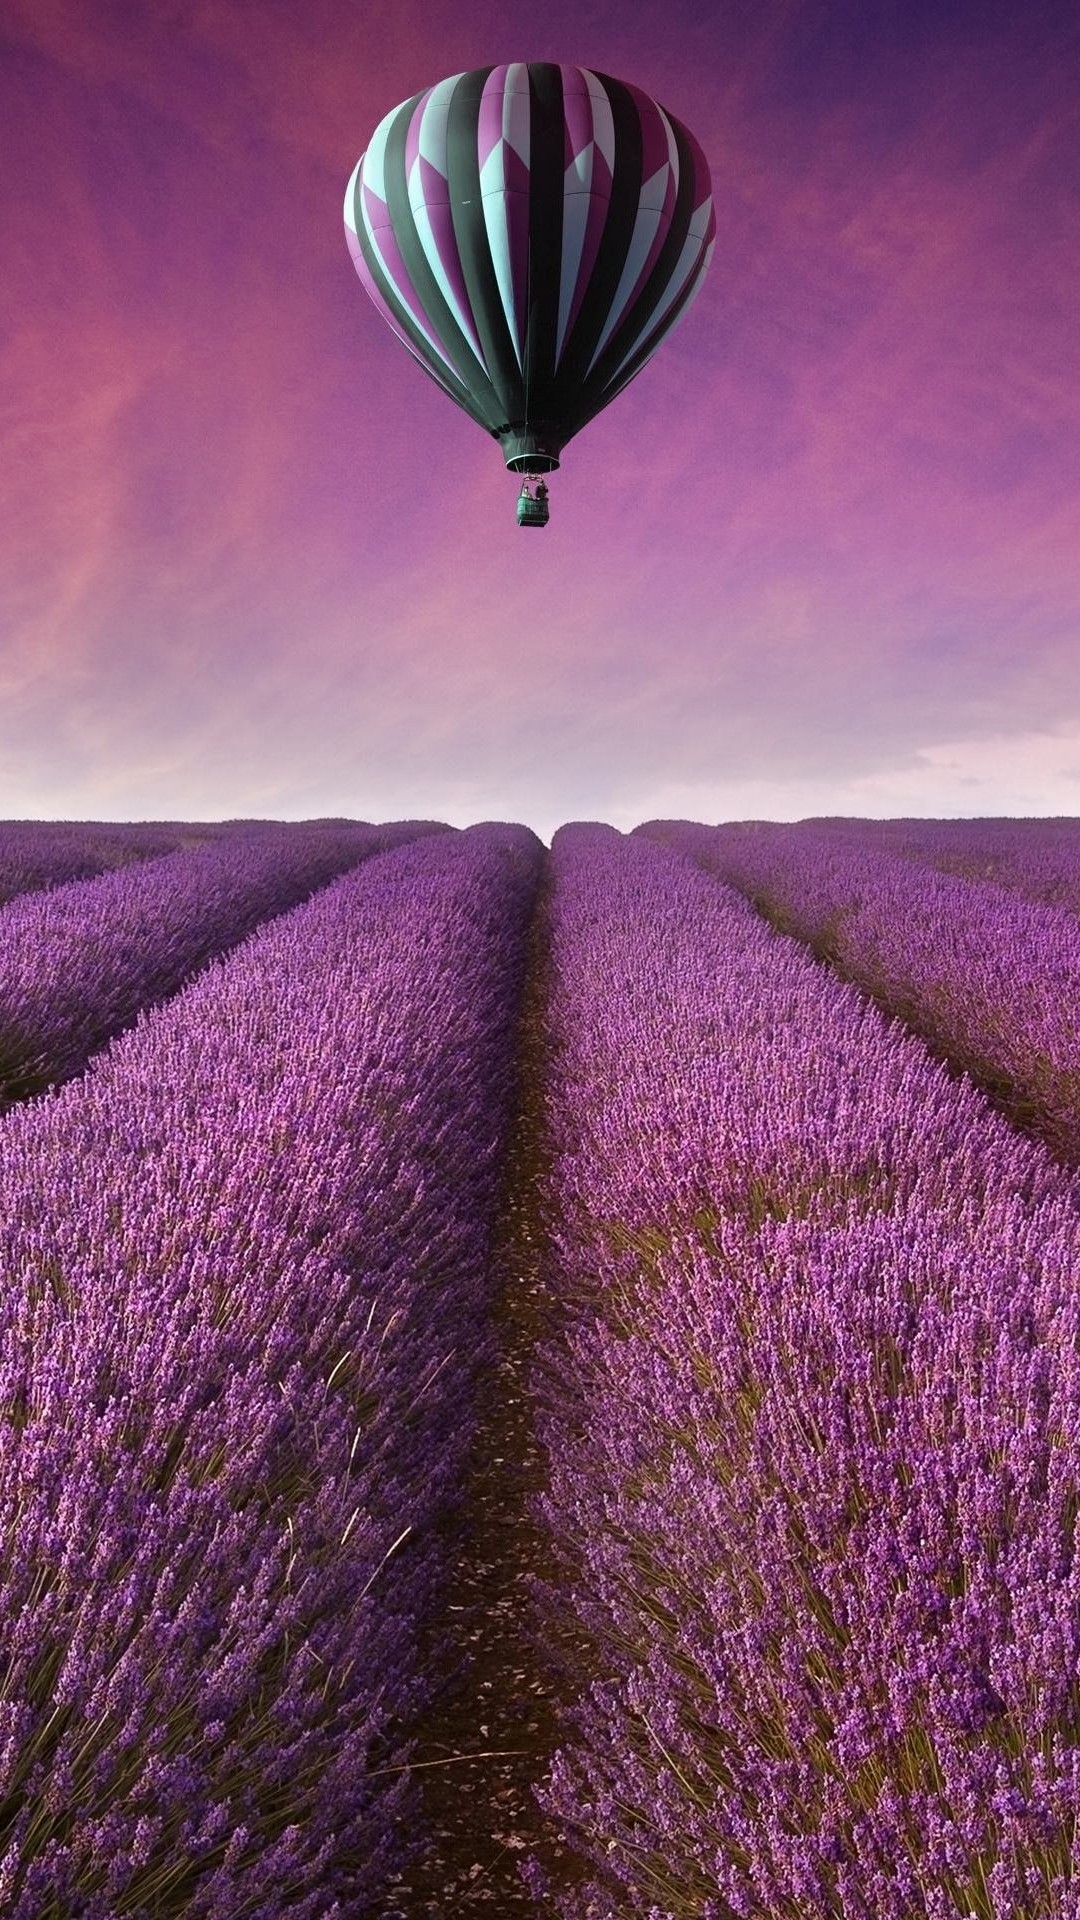 Hot Air Balloon Over Lavender Field Wallpaper for SAMSUNG Galaxy S4